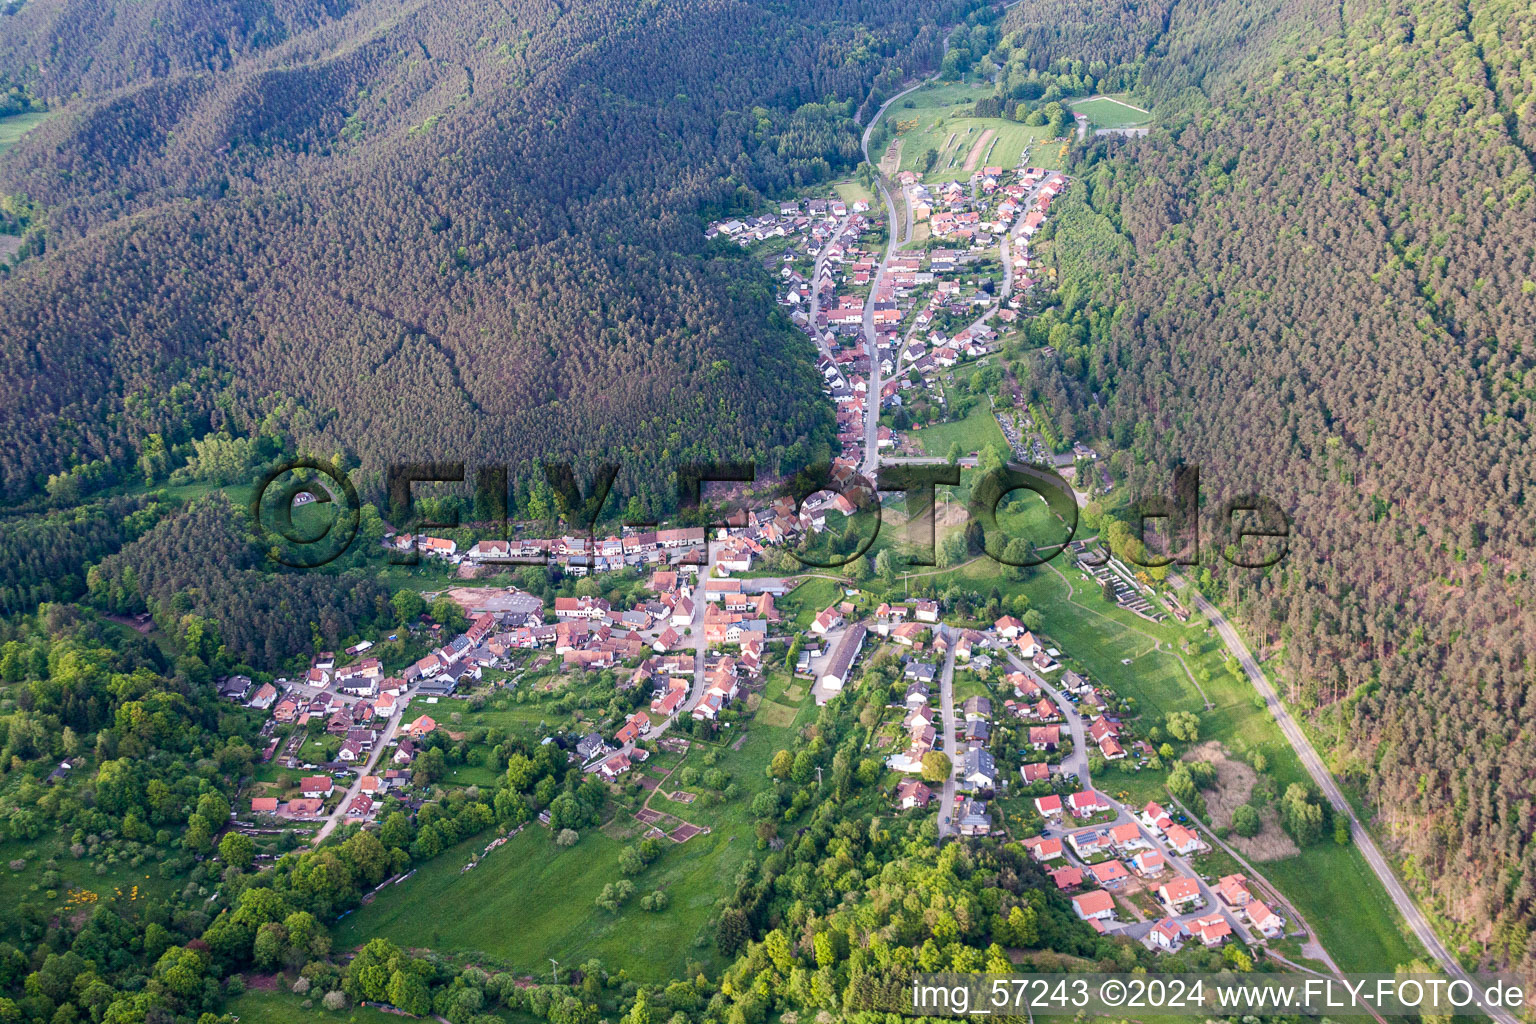 Aerial photograpy of Village - view on the edge of agricultural fields and farmland in Spirkelbach in the state Rhineland-Palatinate, Germany